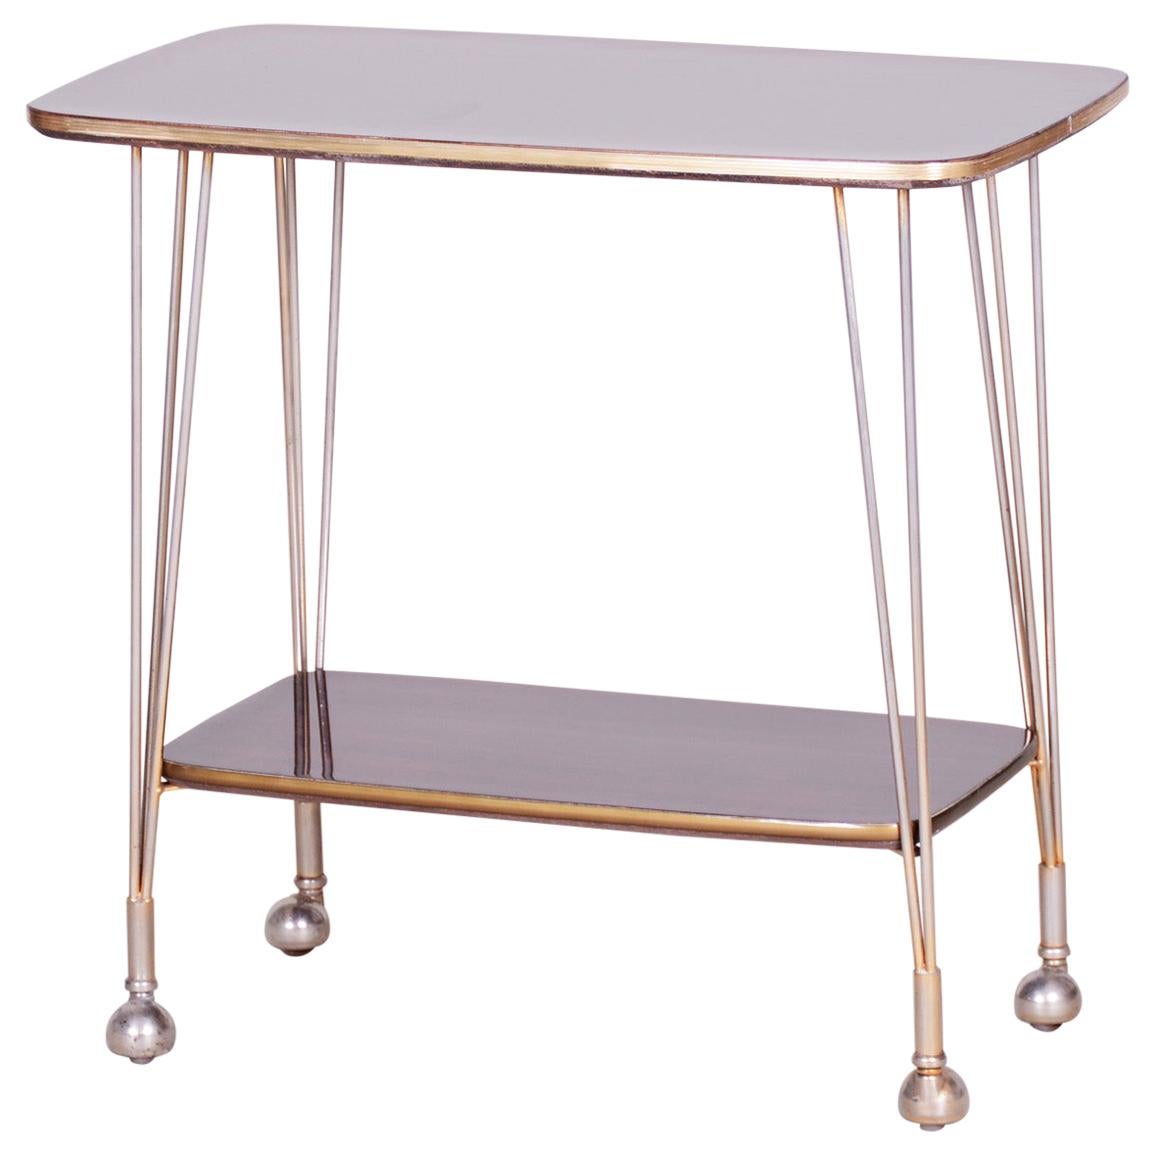 20th Century Art Deco Mahogany Trolley Table, Brass, Excellent Condition, 1950s